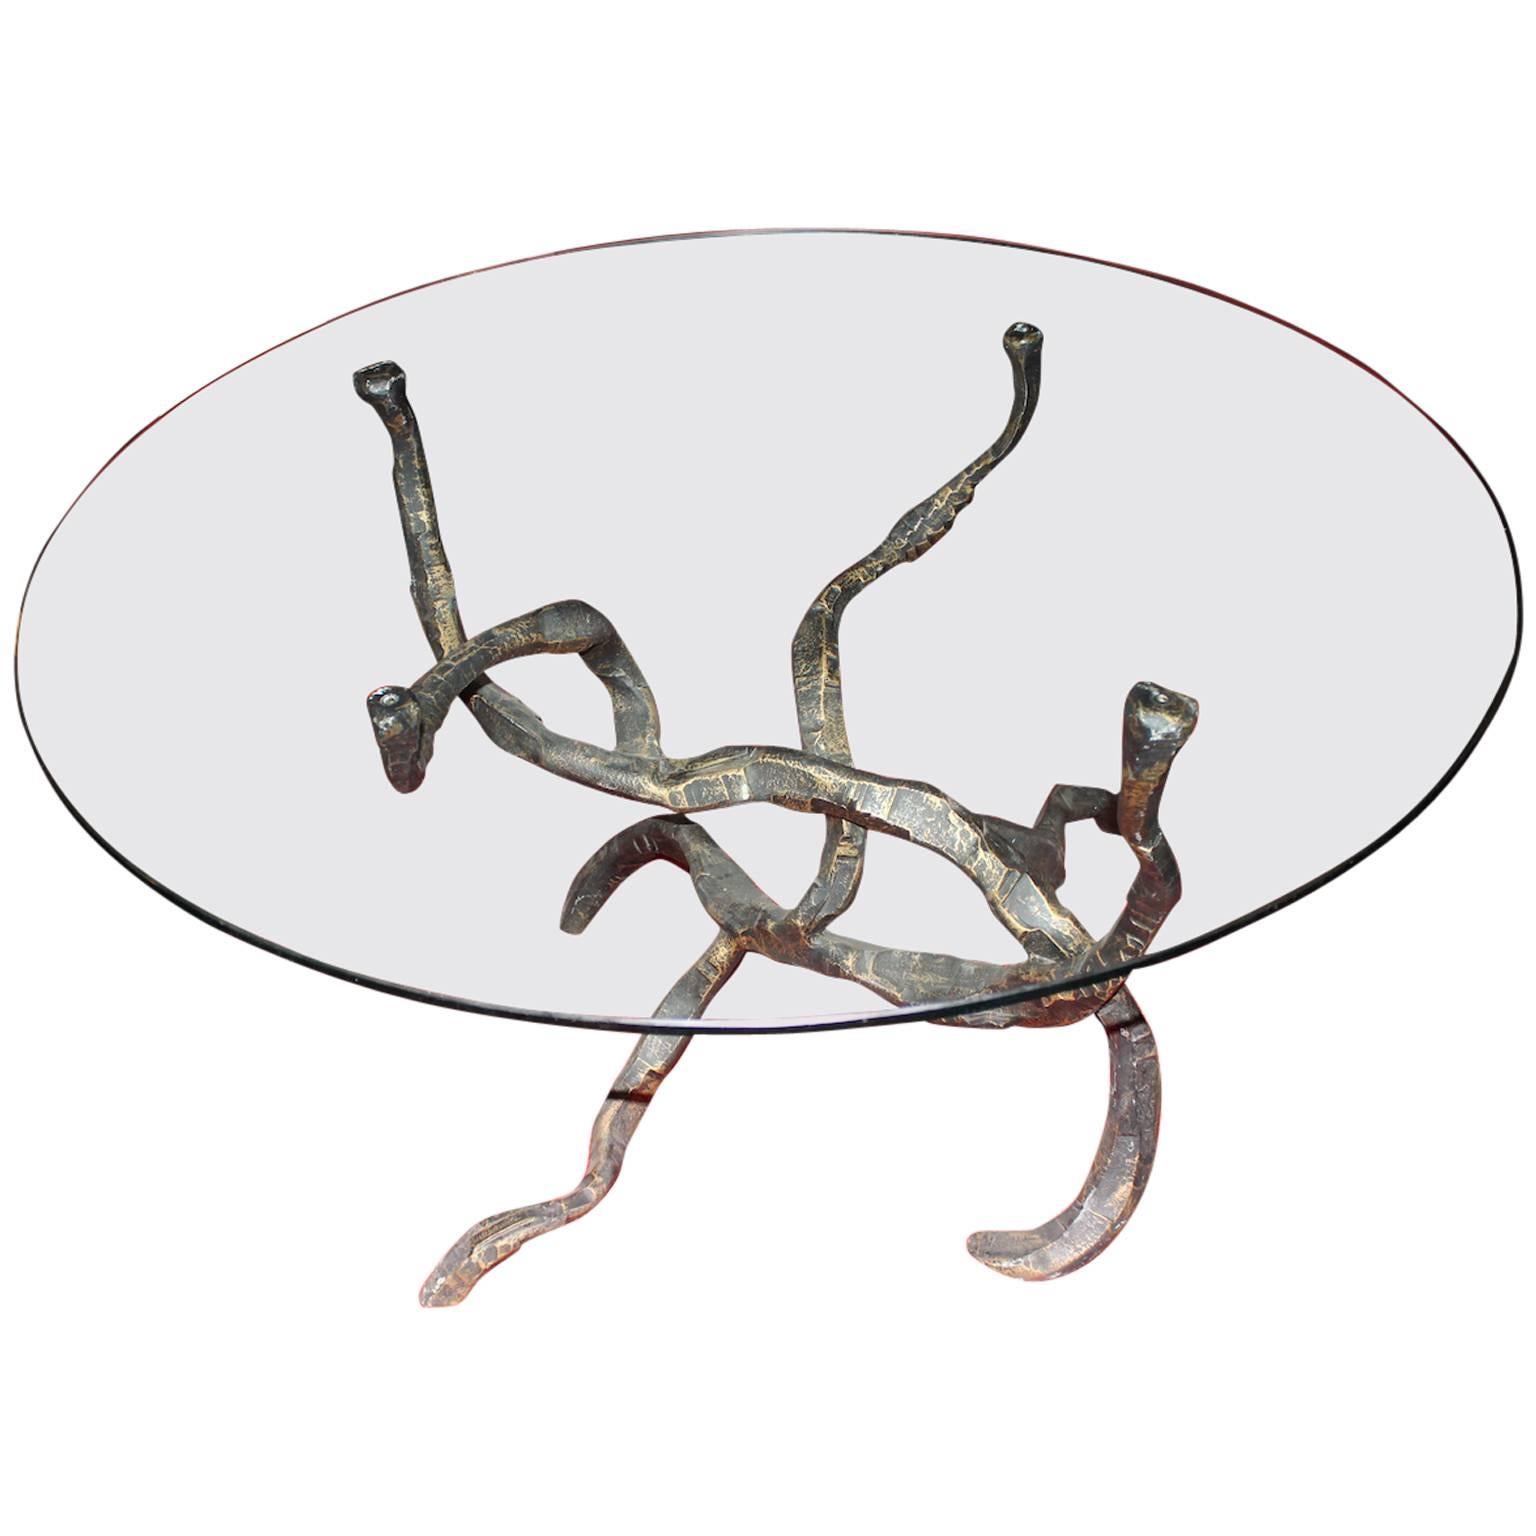 Salvino Marsura Brutalist Forged Iron Round Dining Table with Glass Top, 1970s 